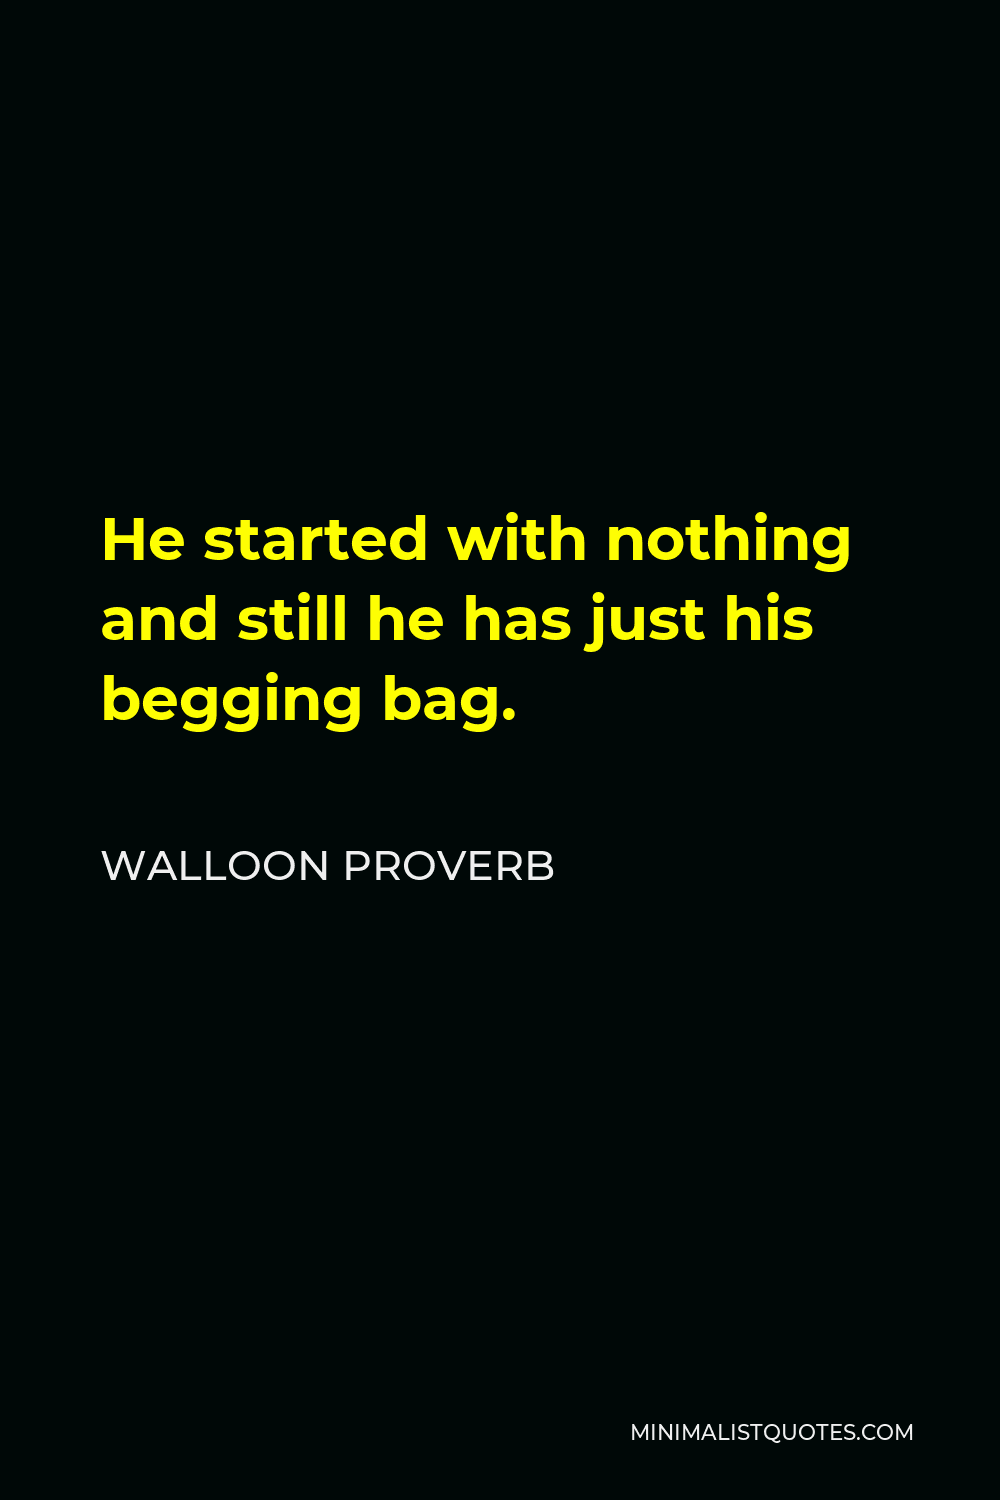 Walloon Proverb Quote - He started with nothing and still he has just his begging bag.